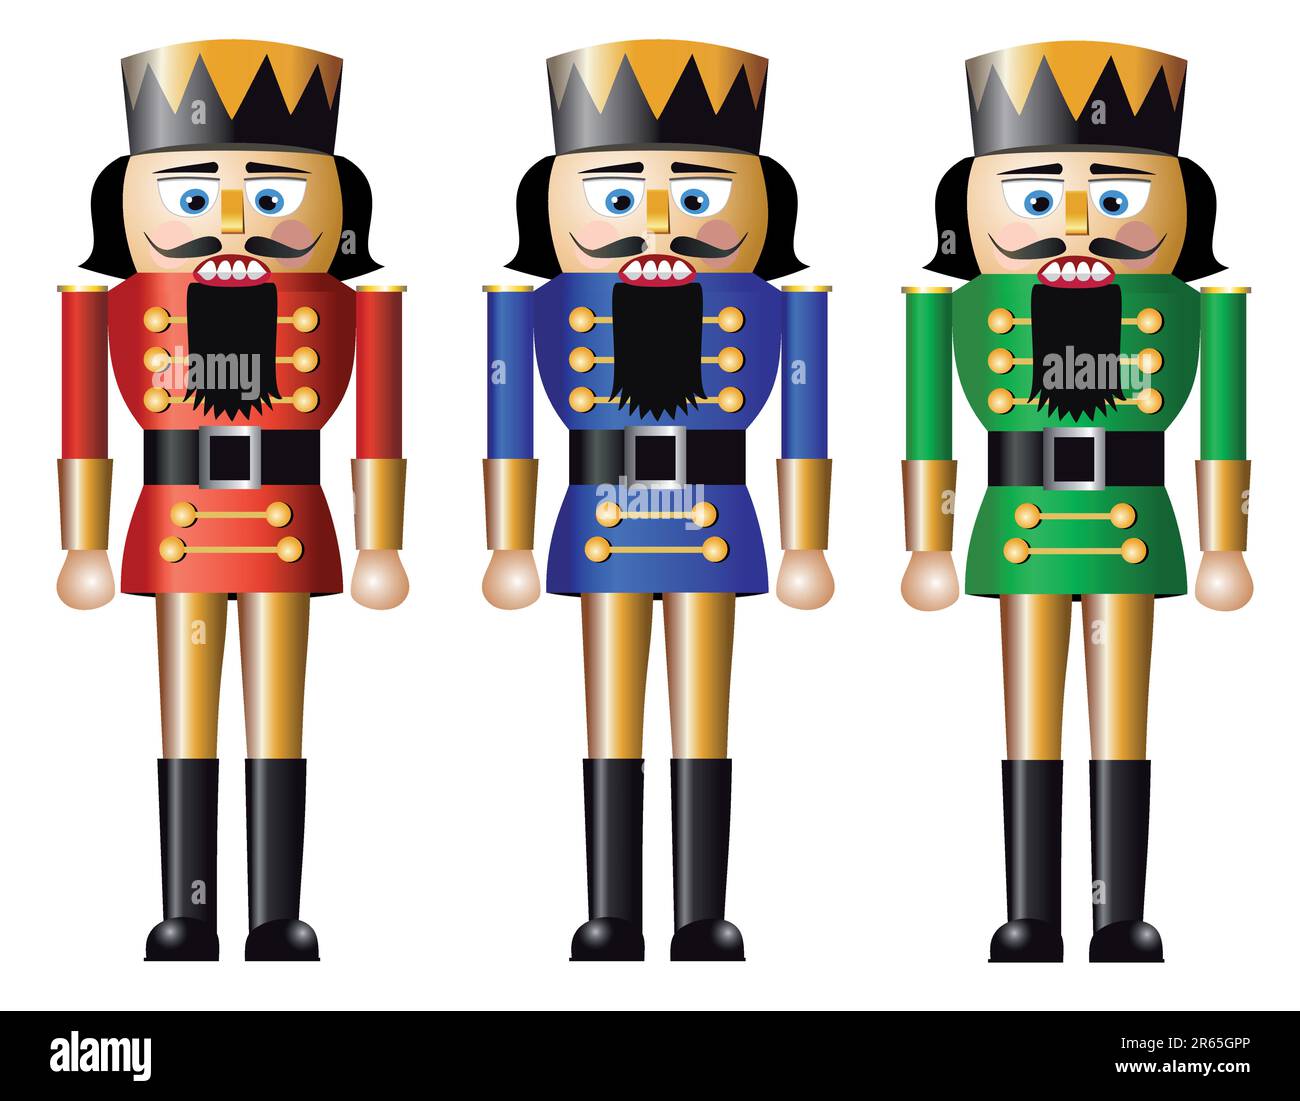 Nutcracker, design in three variations, isolated on white background, full scalable vector graphic included Eps v8 and 300 dpi JPG. Stock Vector